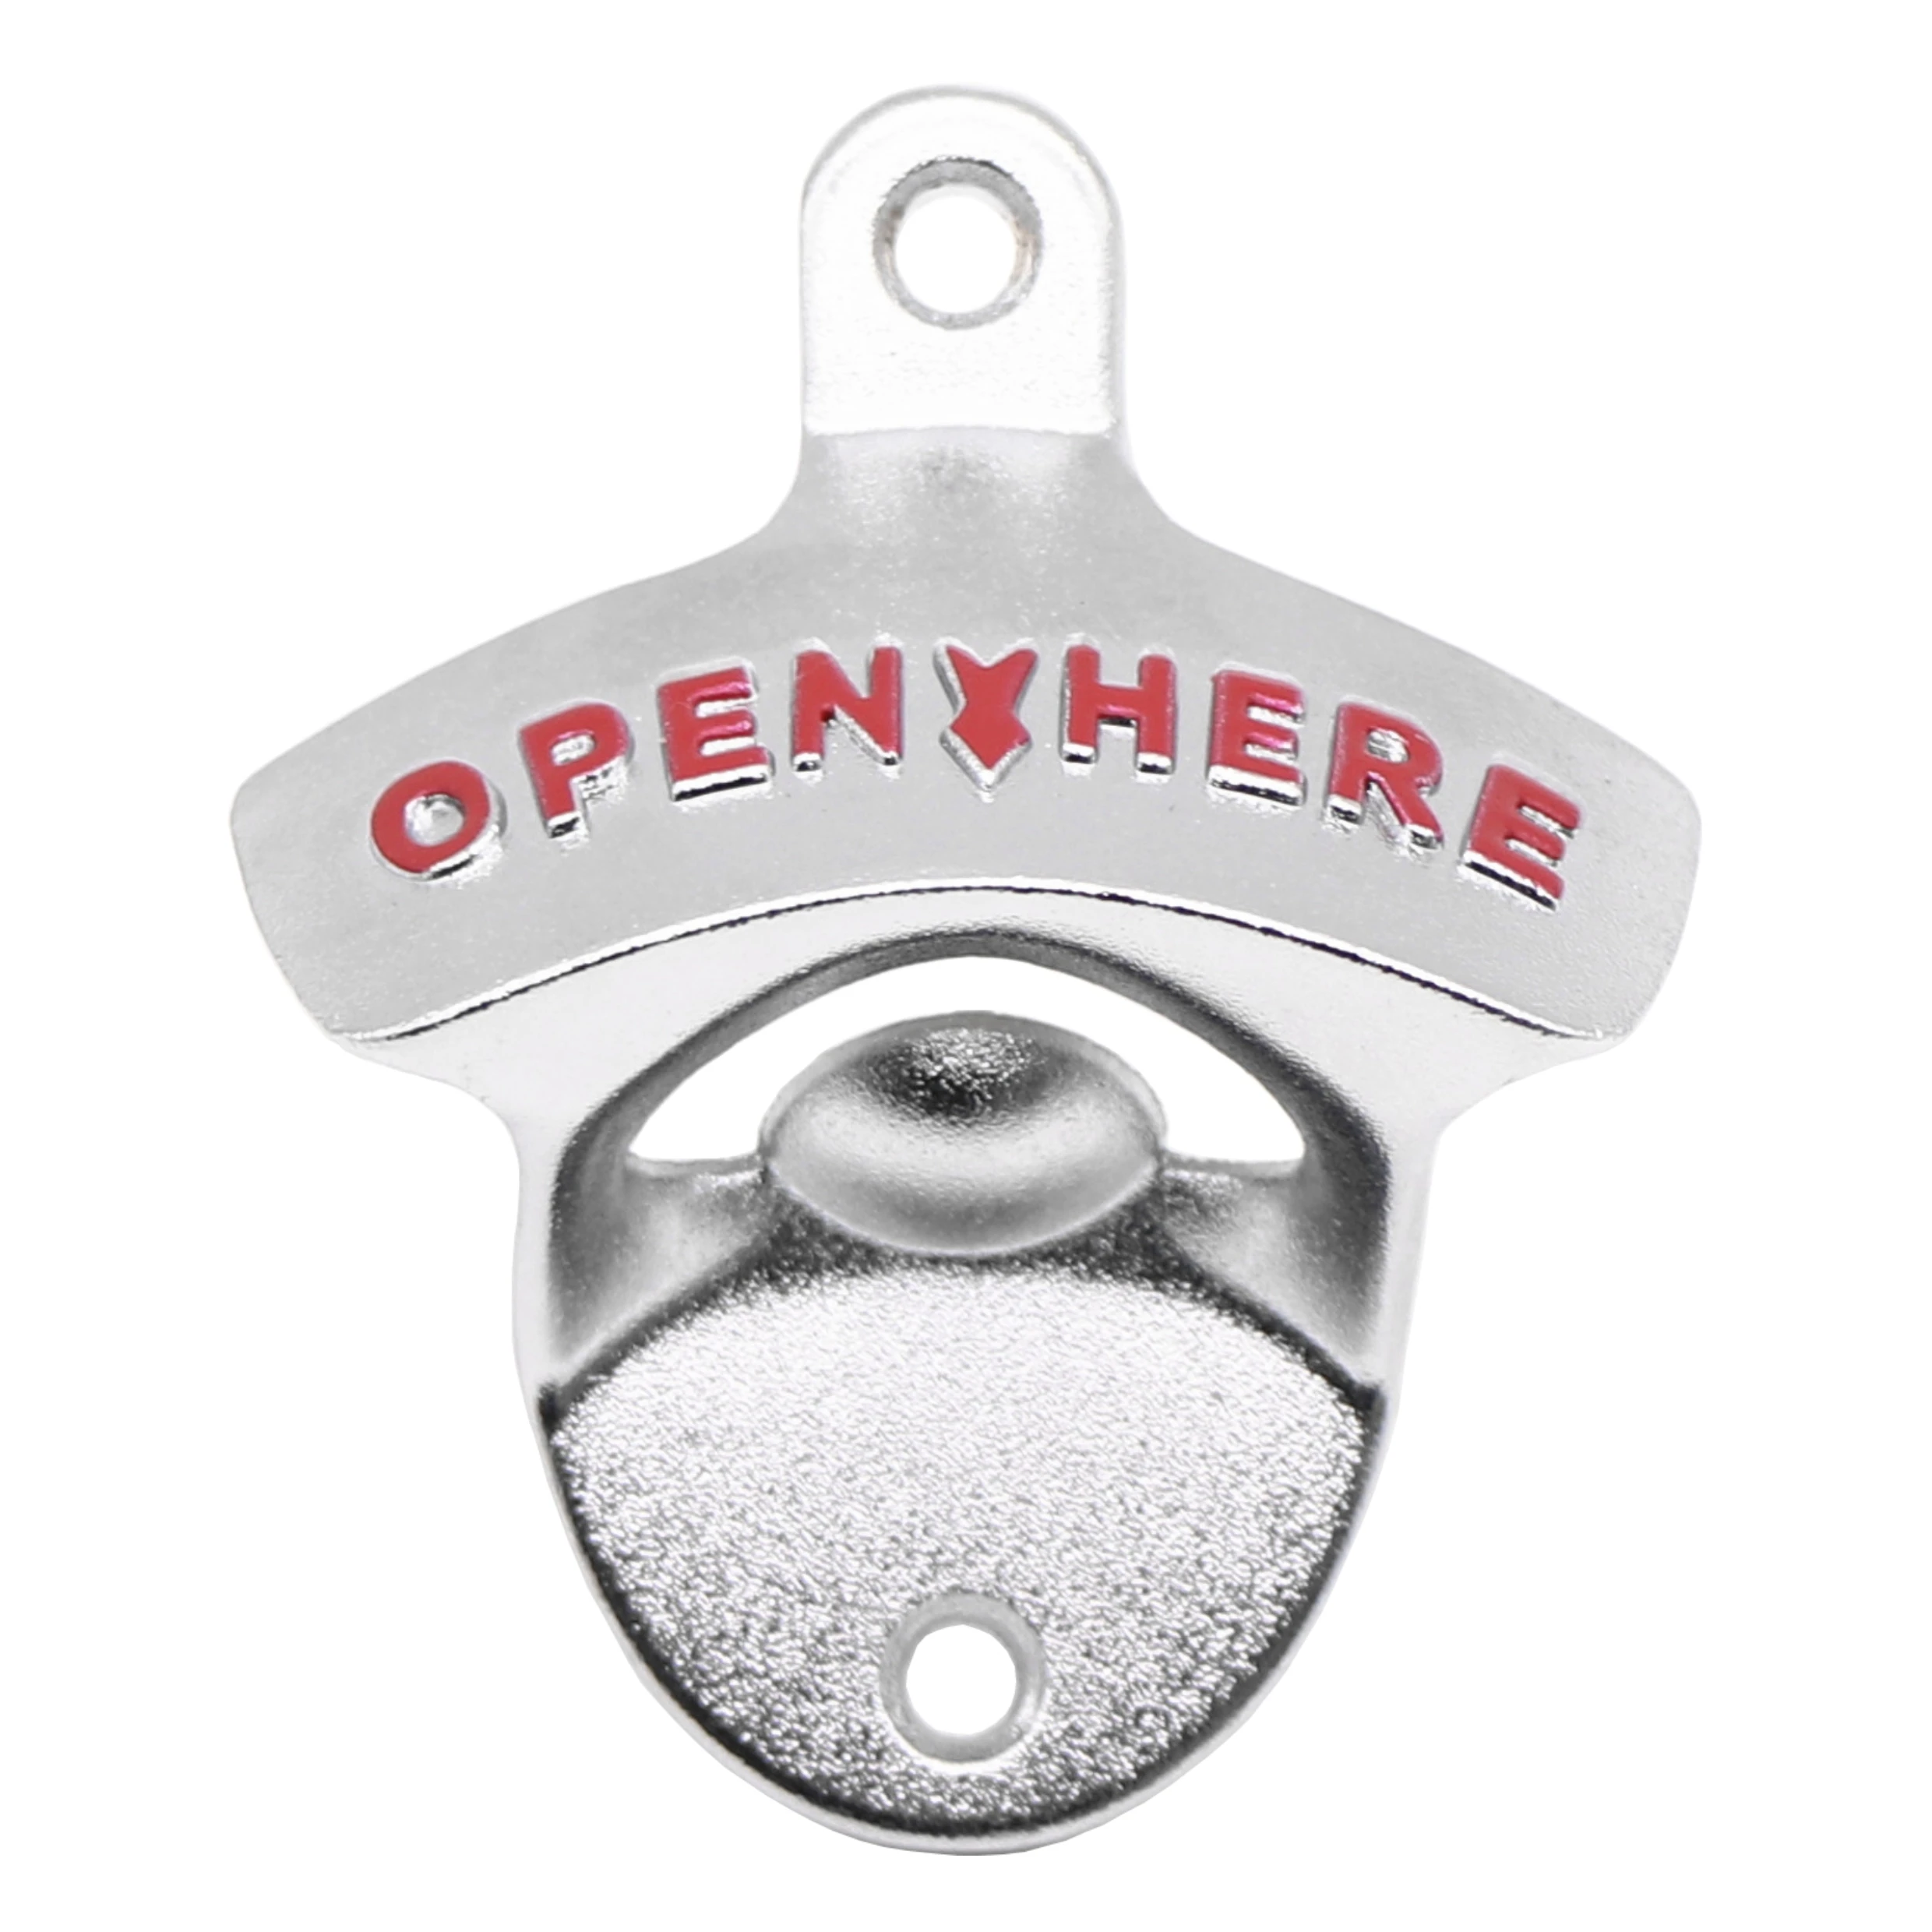 

OPEN HERE Sand Blasting Wall Mounted Bottle Opener Cast Zinc Alloy Crown Stationary Beer Bottle Opener Mounting Screws Included, Silver